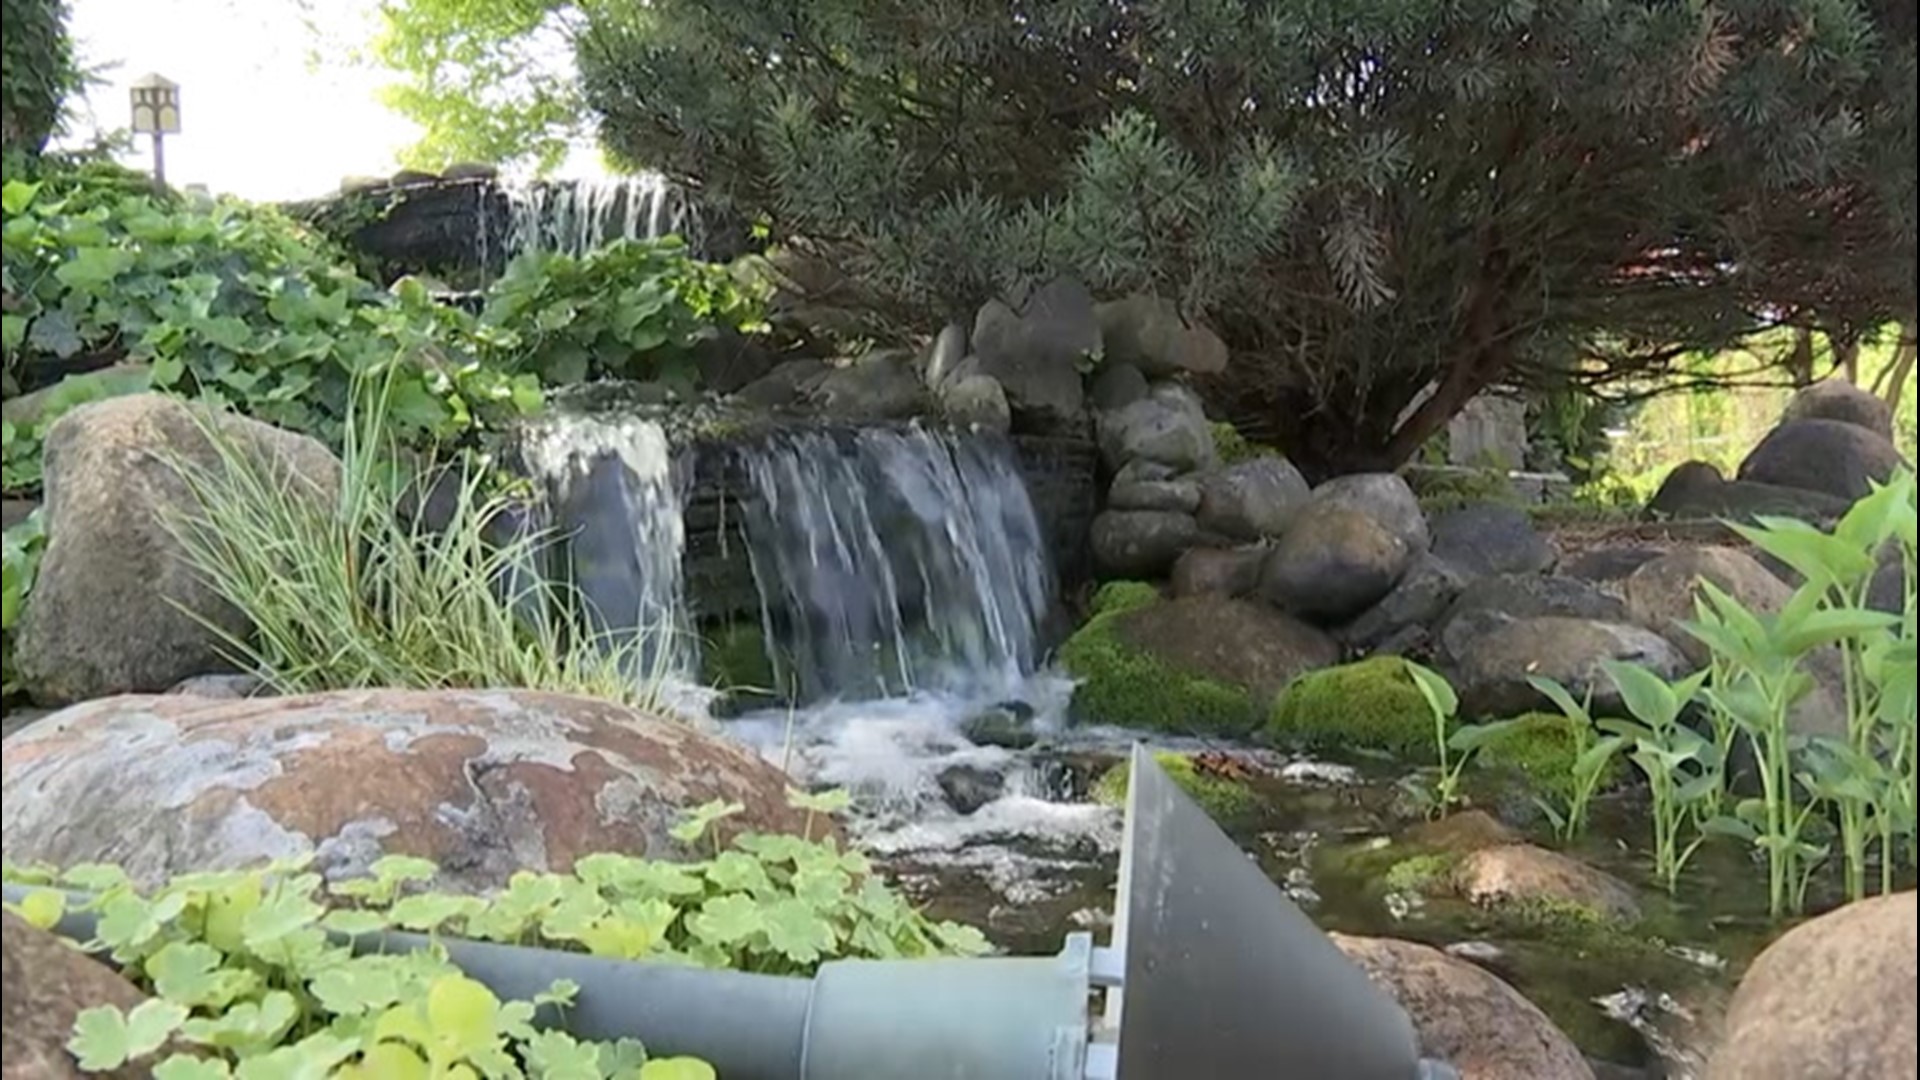 The soothing sound of water flowing has people flocking to garden centers to try out aquatic gardening for the first time. AccuWeather's Blake Naftel has some advice.